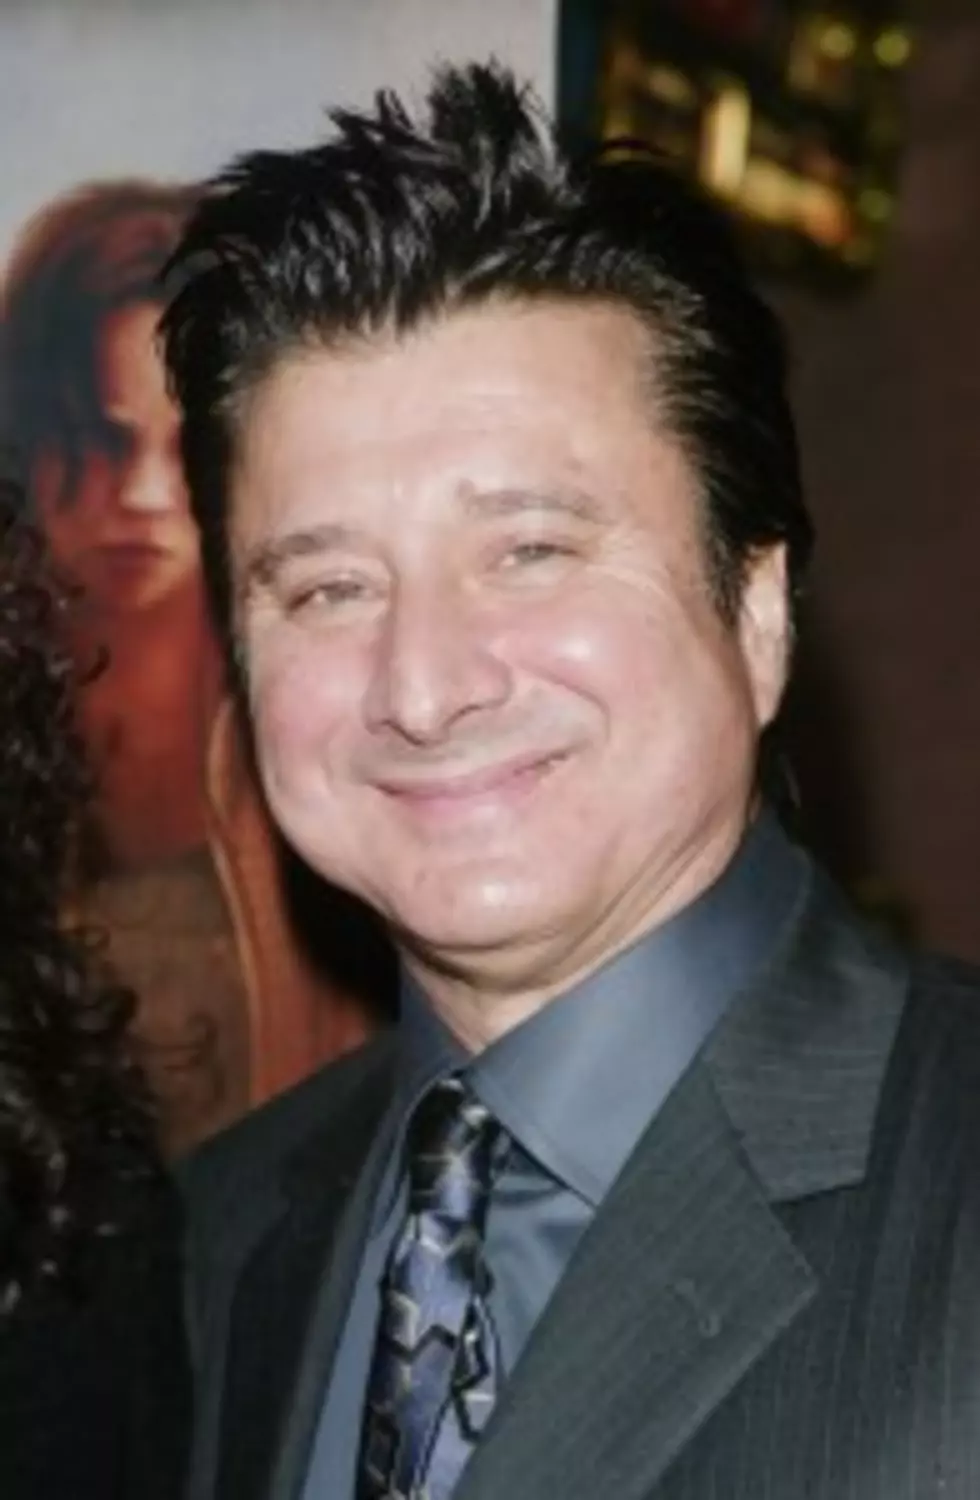 Steve Perry Ex-Frontman of Journey Working on New Album, Maybe